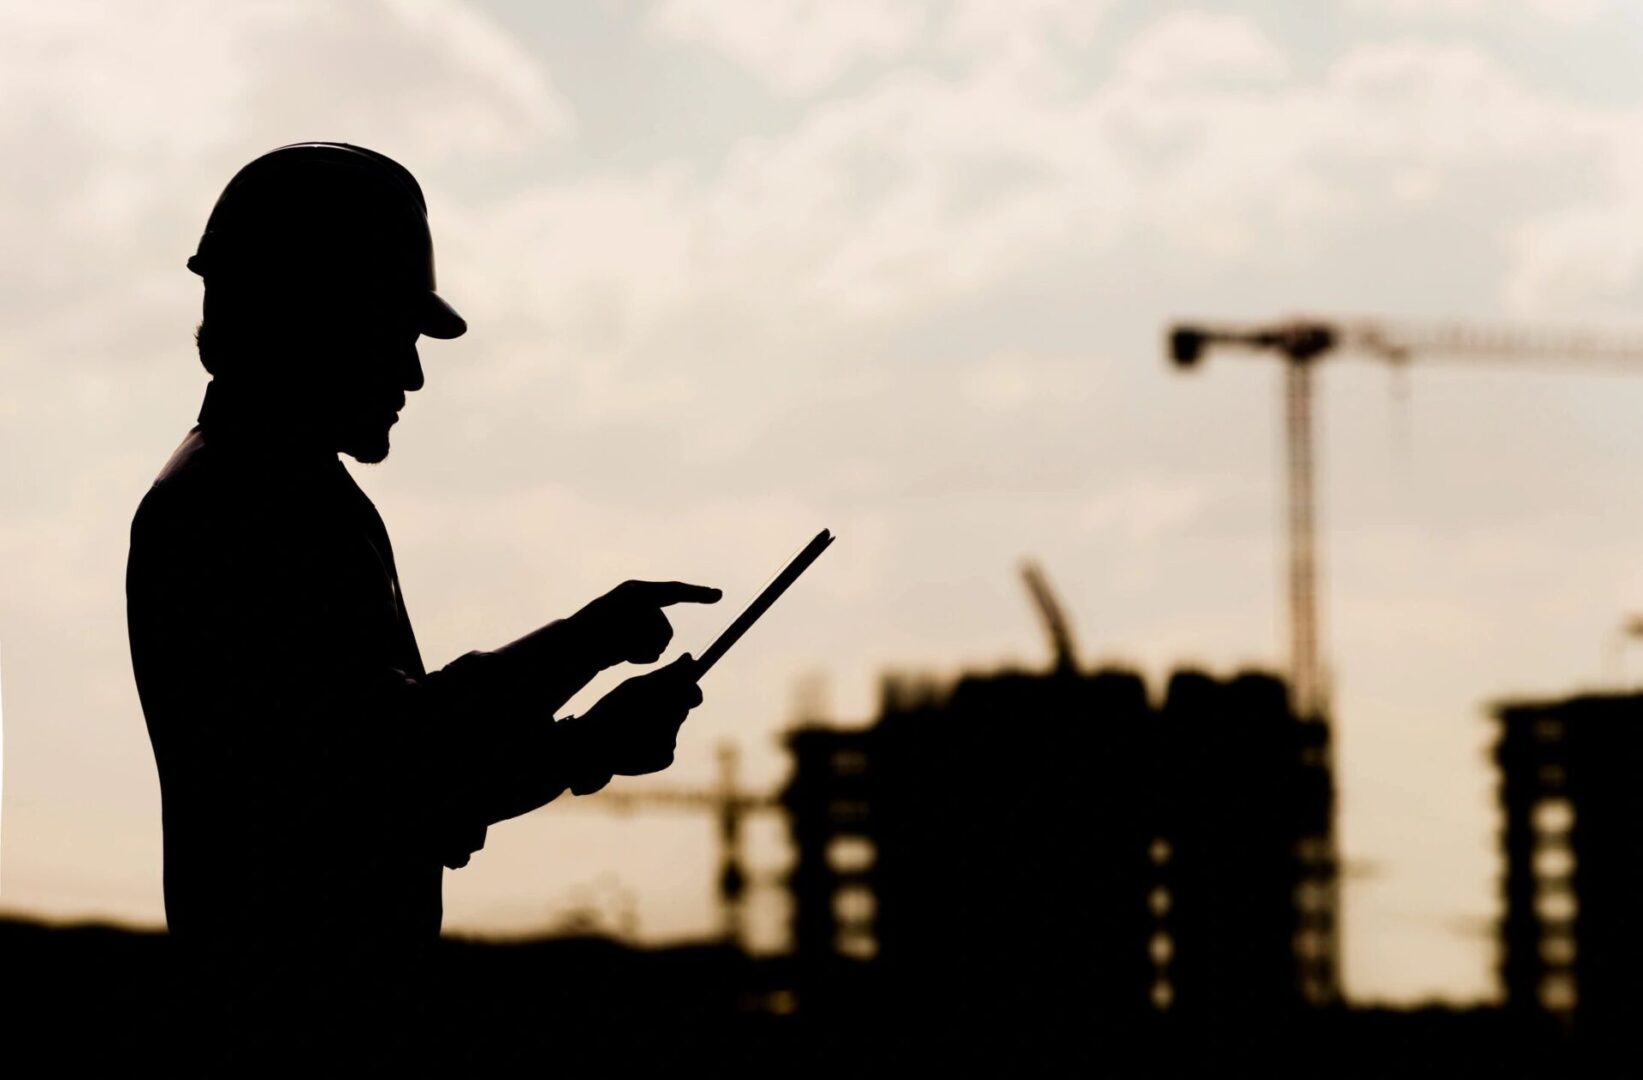 Silhouette of a construction worker with a hard hat using a tablet at a construction site during sunset.